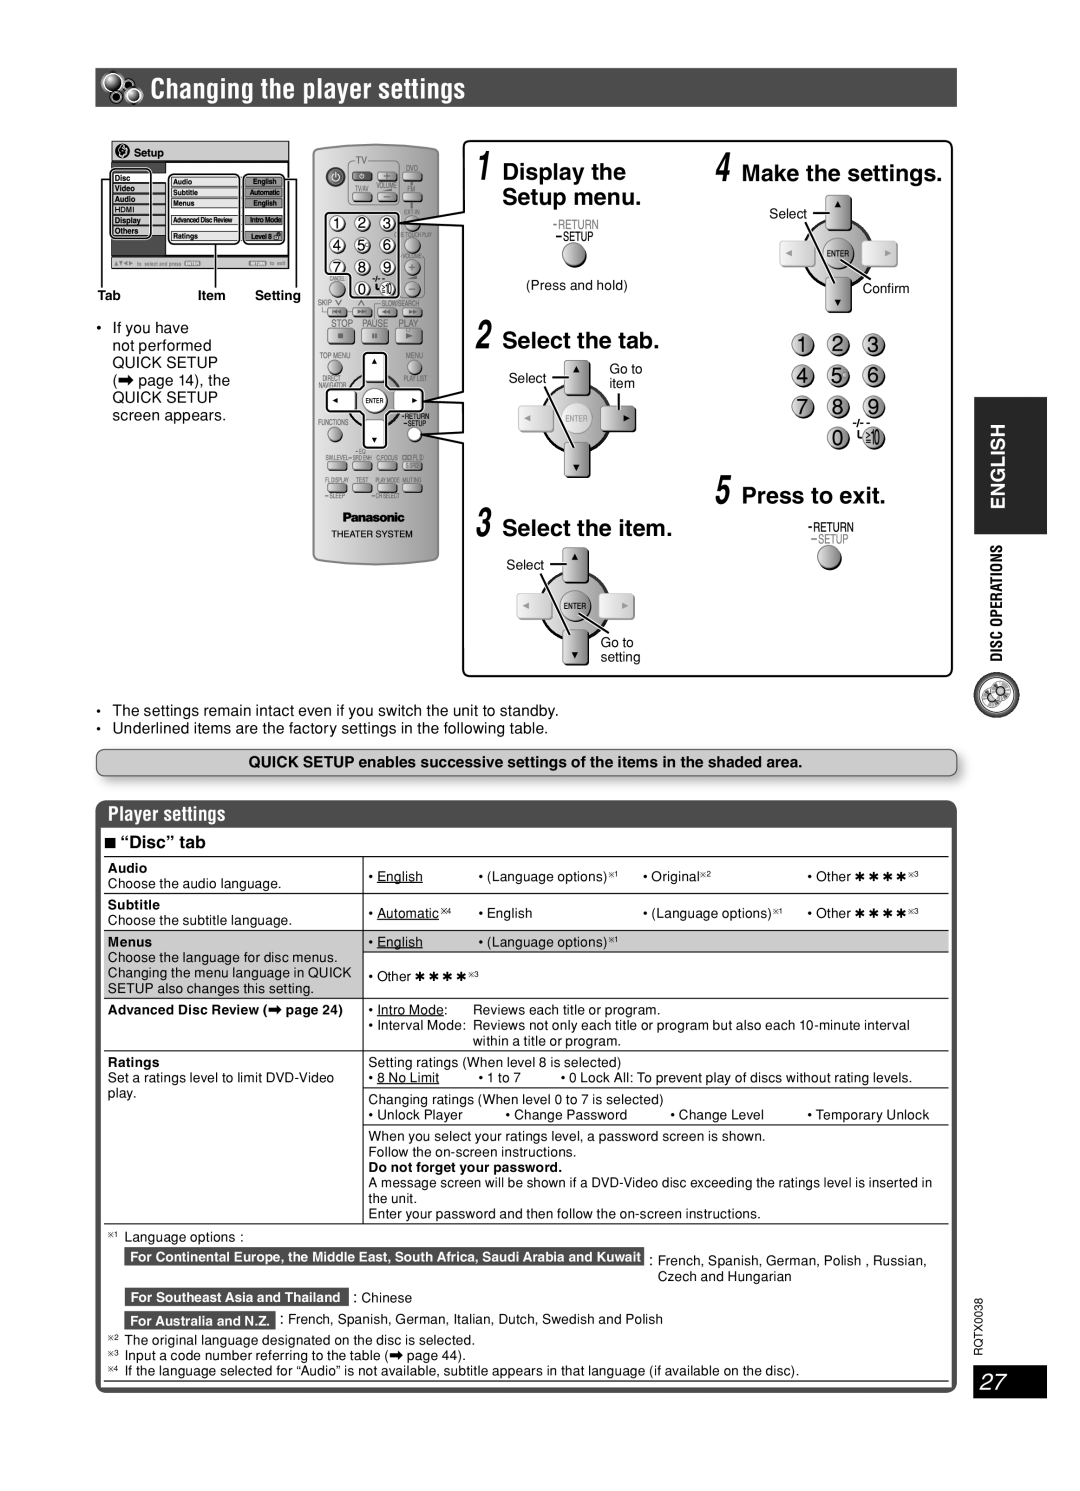 Panasonic SC-PT550 Changing the player settings, Display the, Setup menu, Select the tab, Press to exit 3 Select the item 